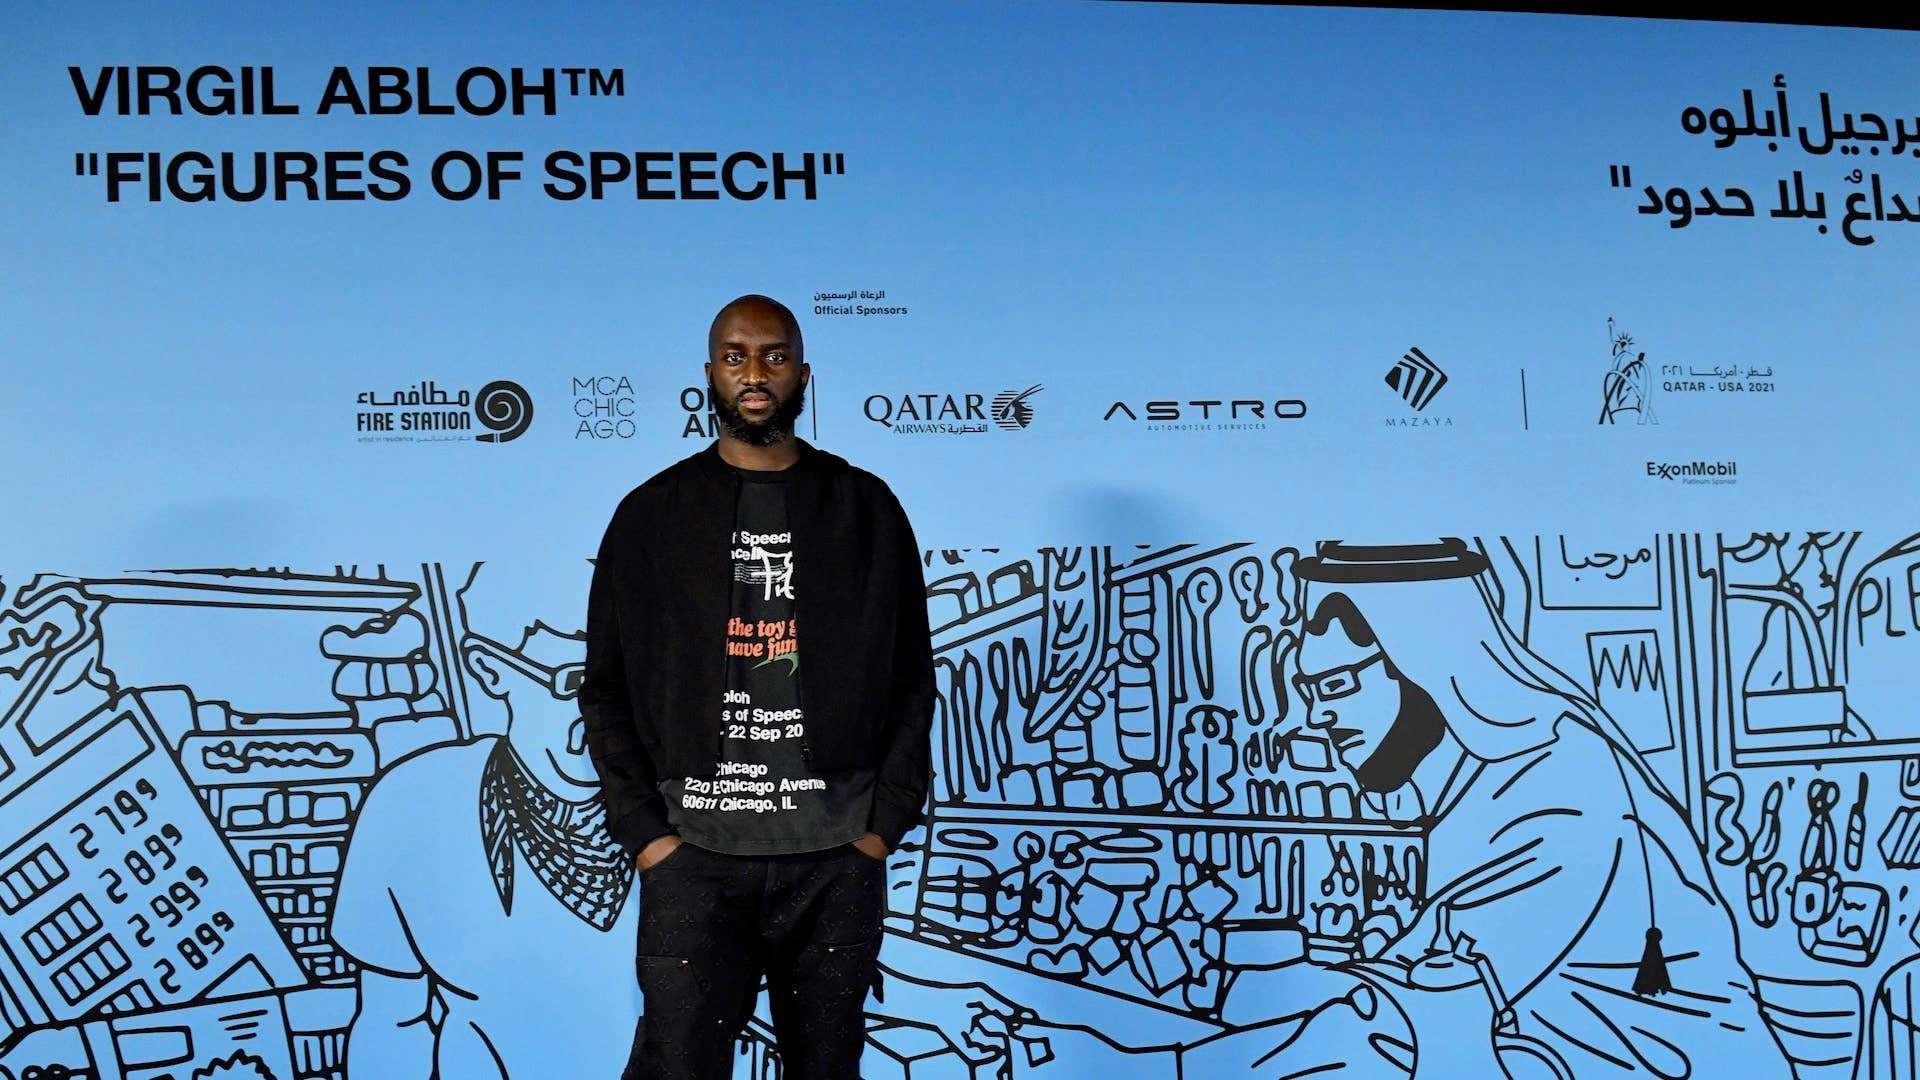 Virgil Abloh attends the opening of his exhibition “Figures of Speech”